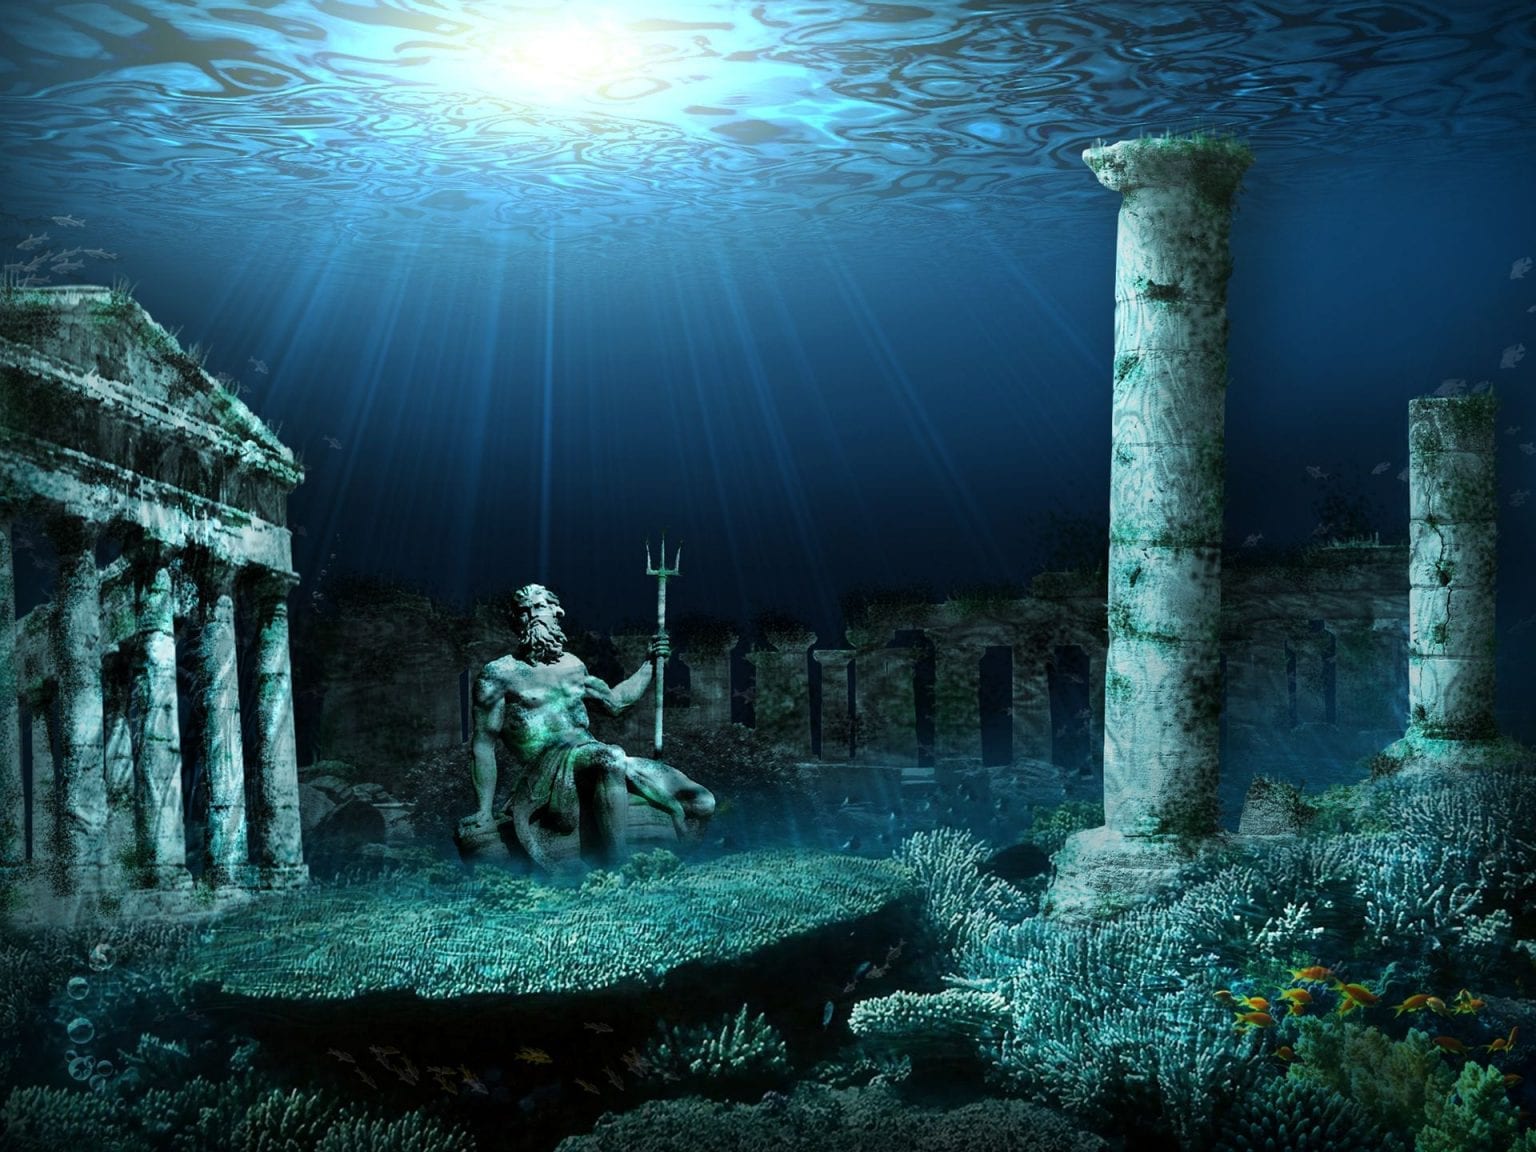  An illustration of an Ancient Roman underwater structure in Campo di Mare with a statue of Neptune, Greek God of the sea, holding a trident in his right hand.